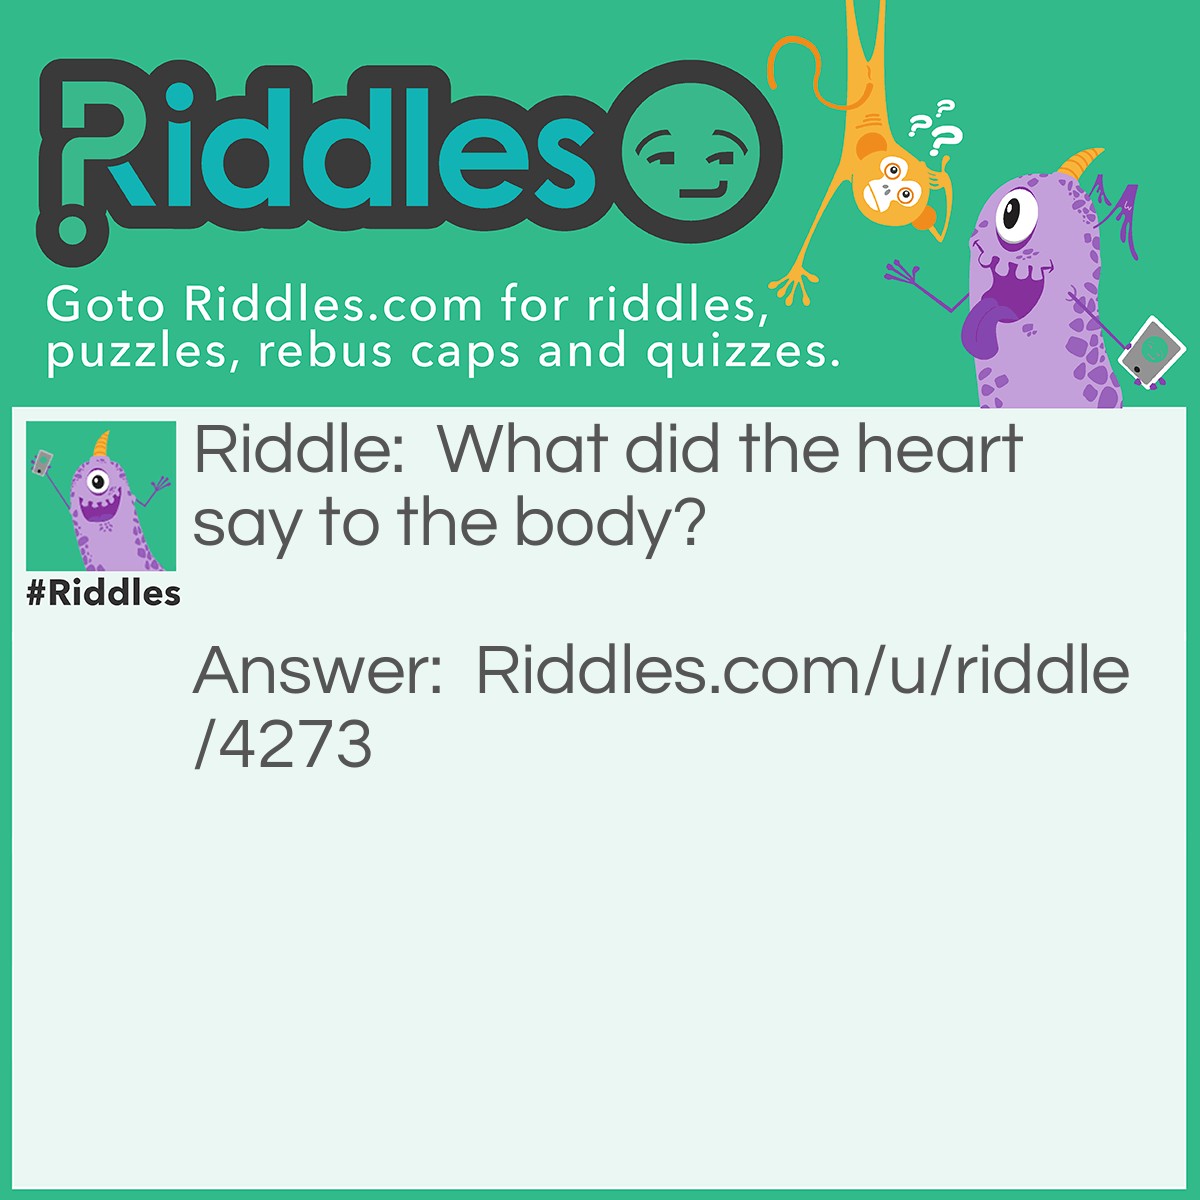 Riddle: What did the heart say to the body? Answer: I love u body.